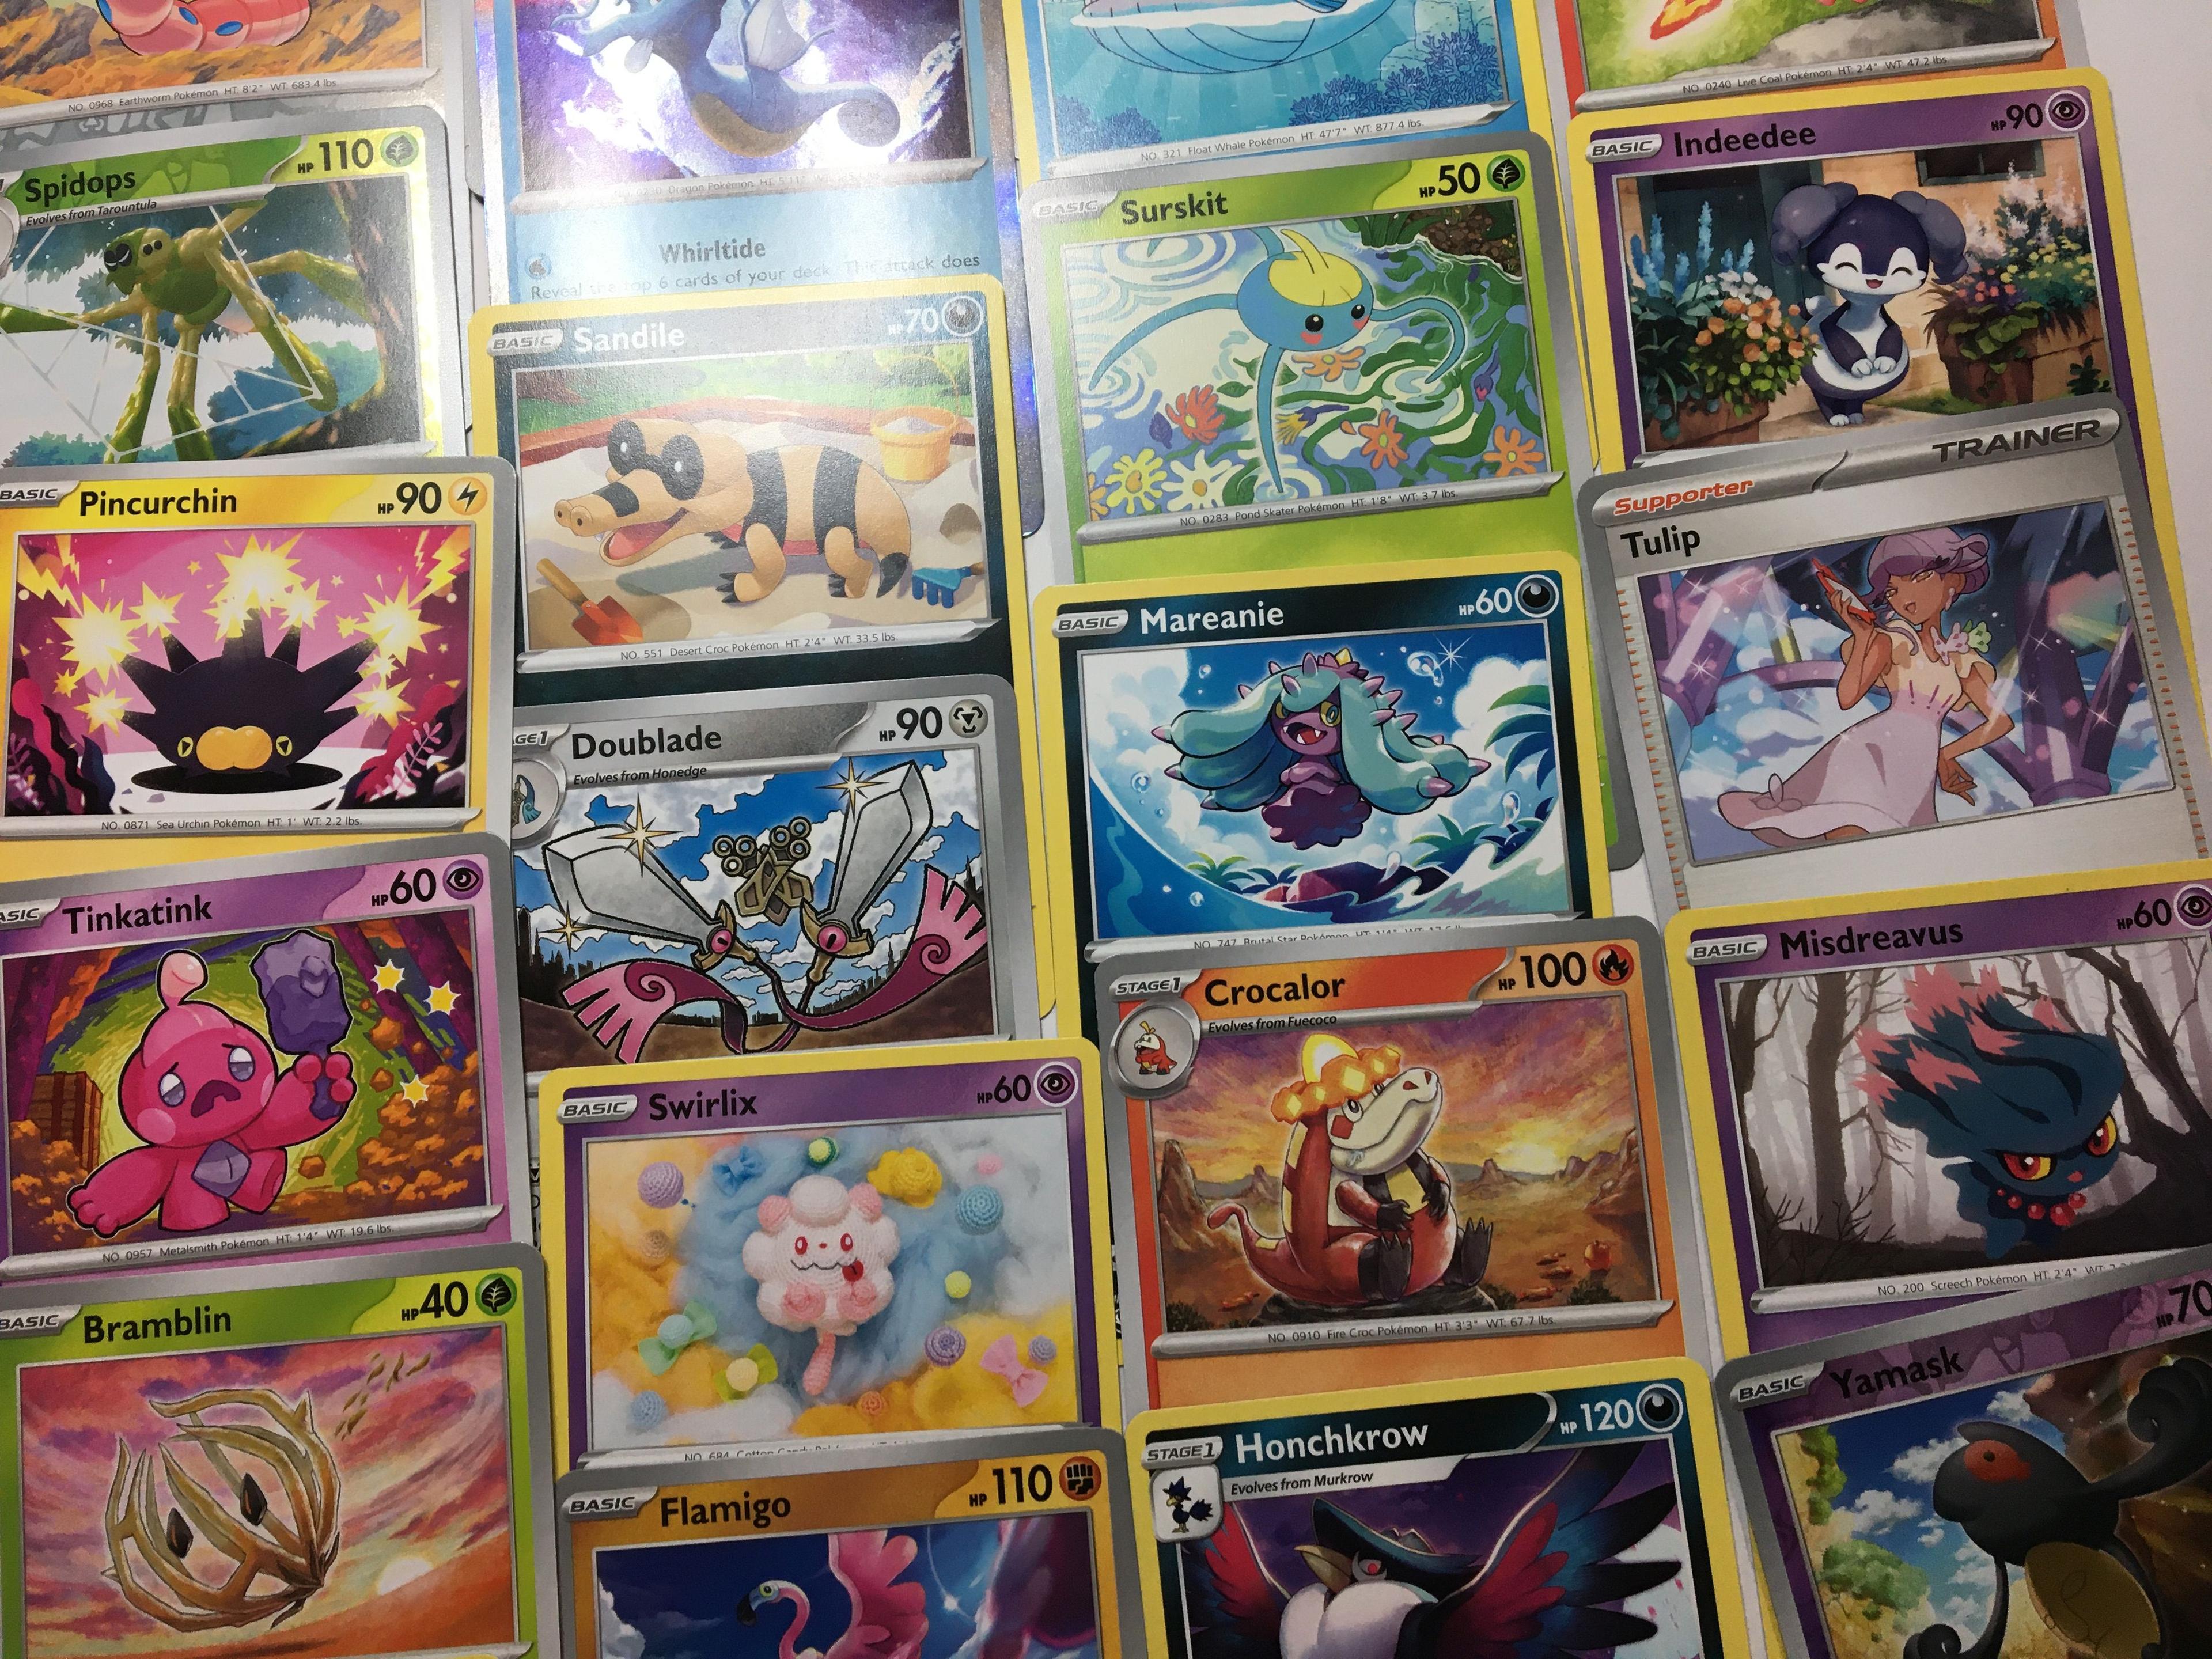 Pokemon Card Lot Rarers Holos And More Huge Mix 50 Cards Pack Fresh Mint